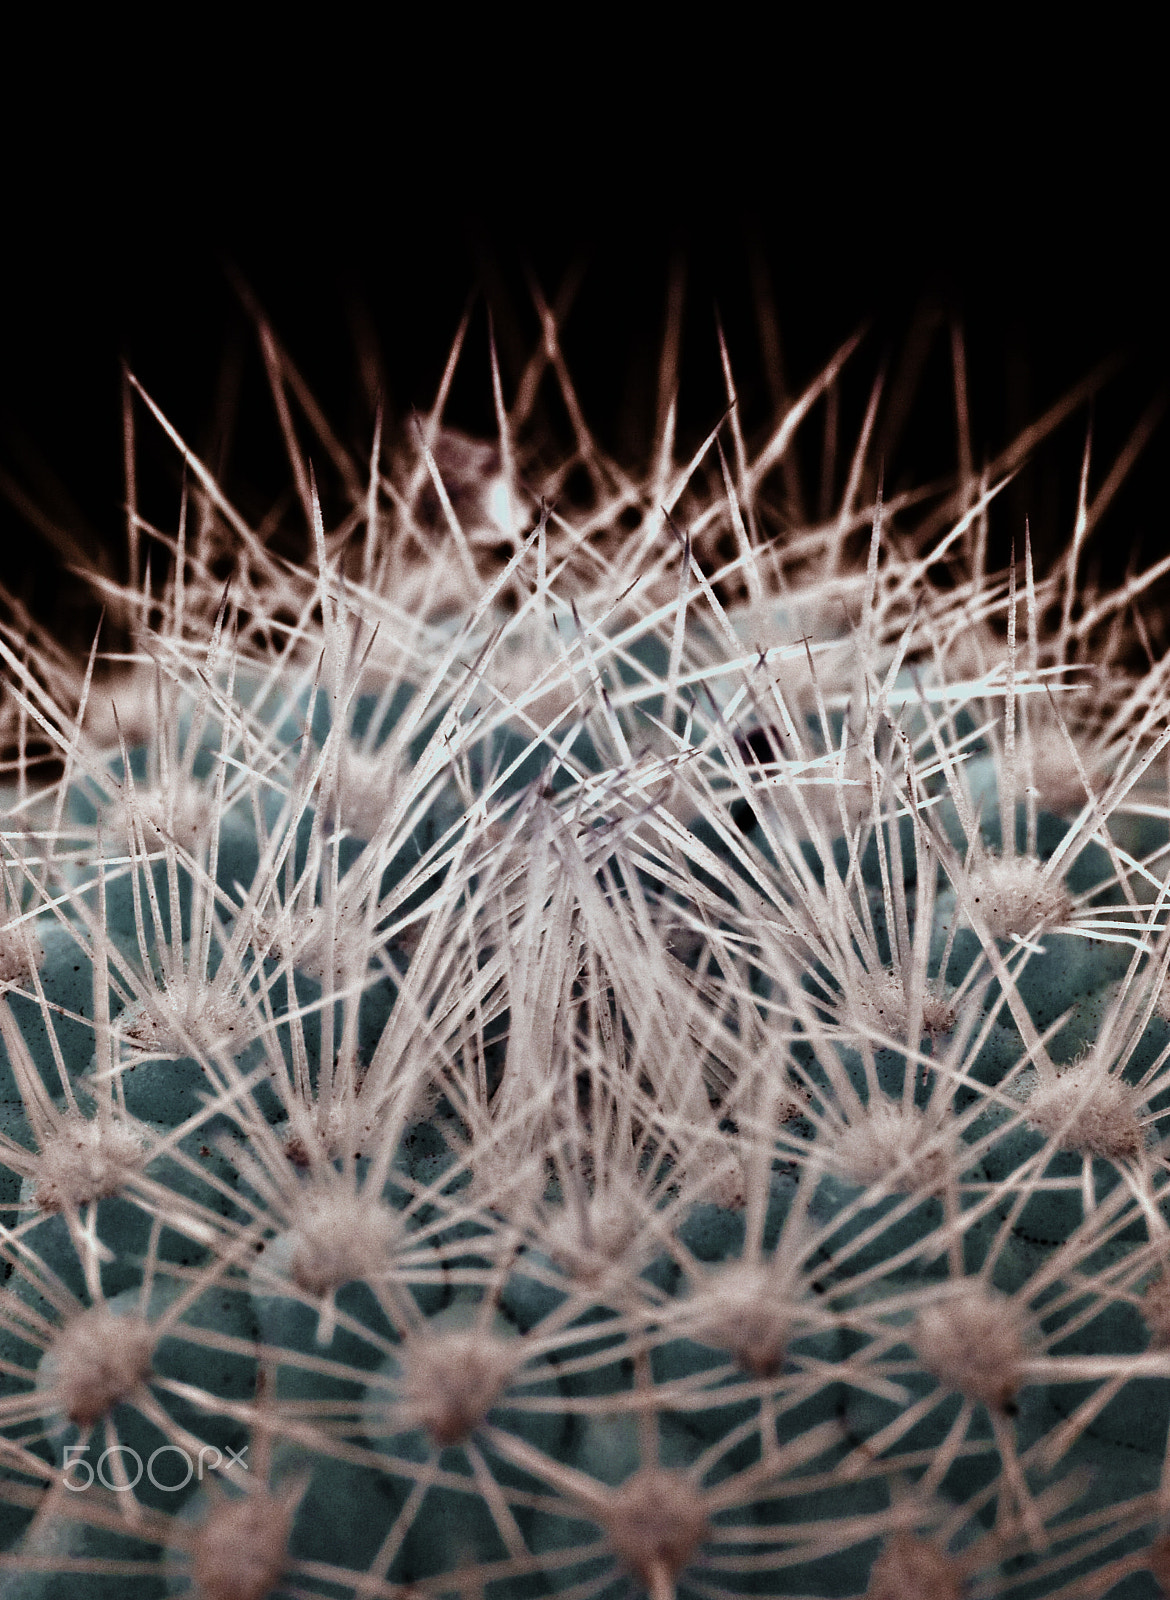 Pentax *ist DL sample photo. Infrared macro of a cactus photography